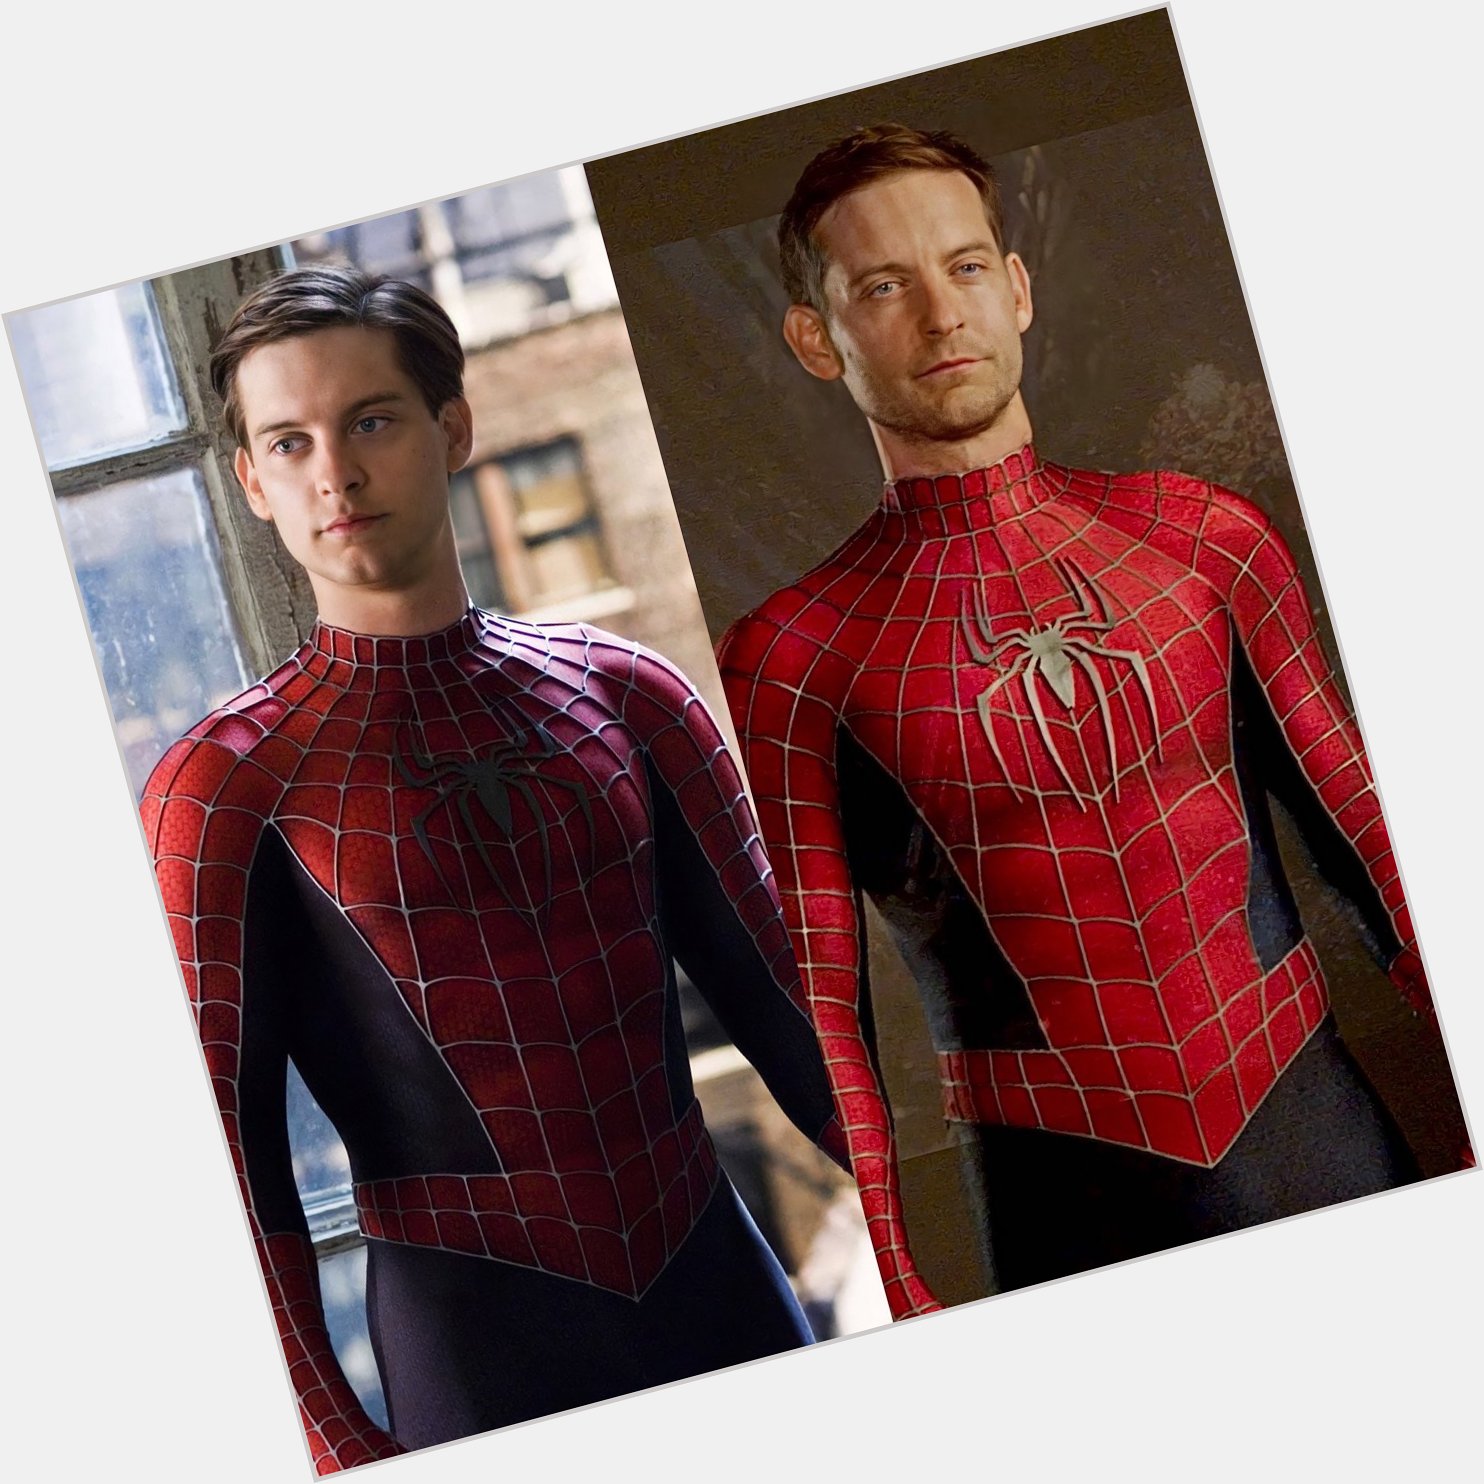 Happy birthday to the best Spider-Man, Tobey Maguire    